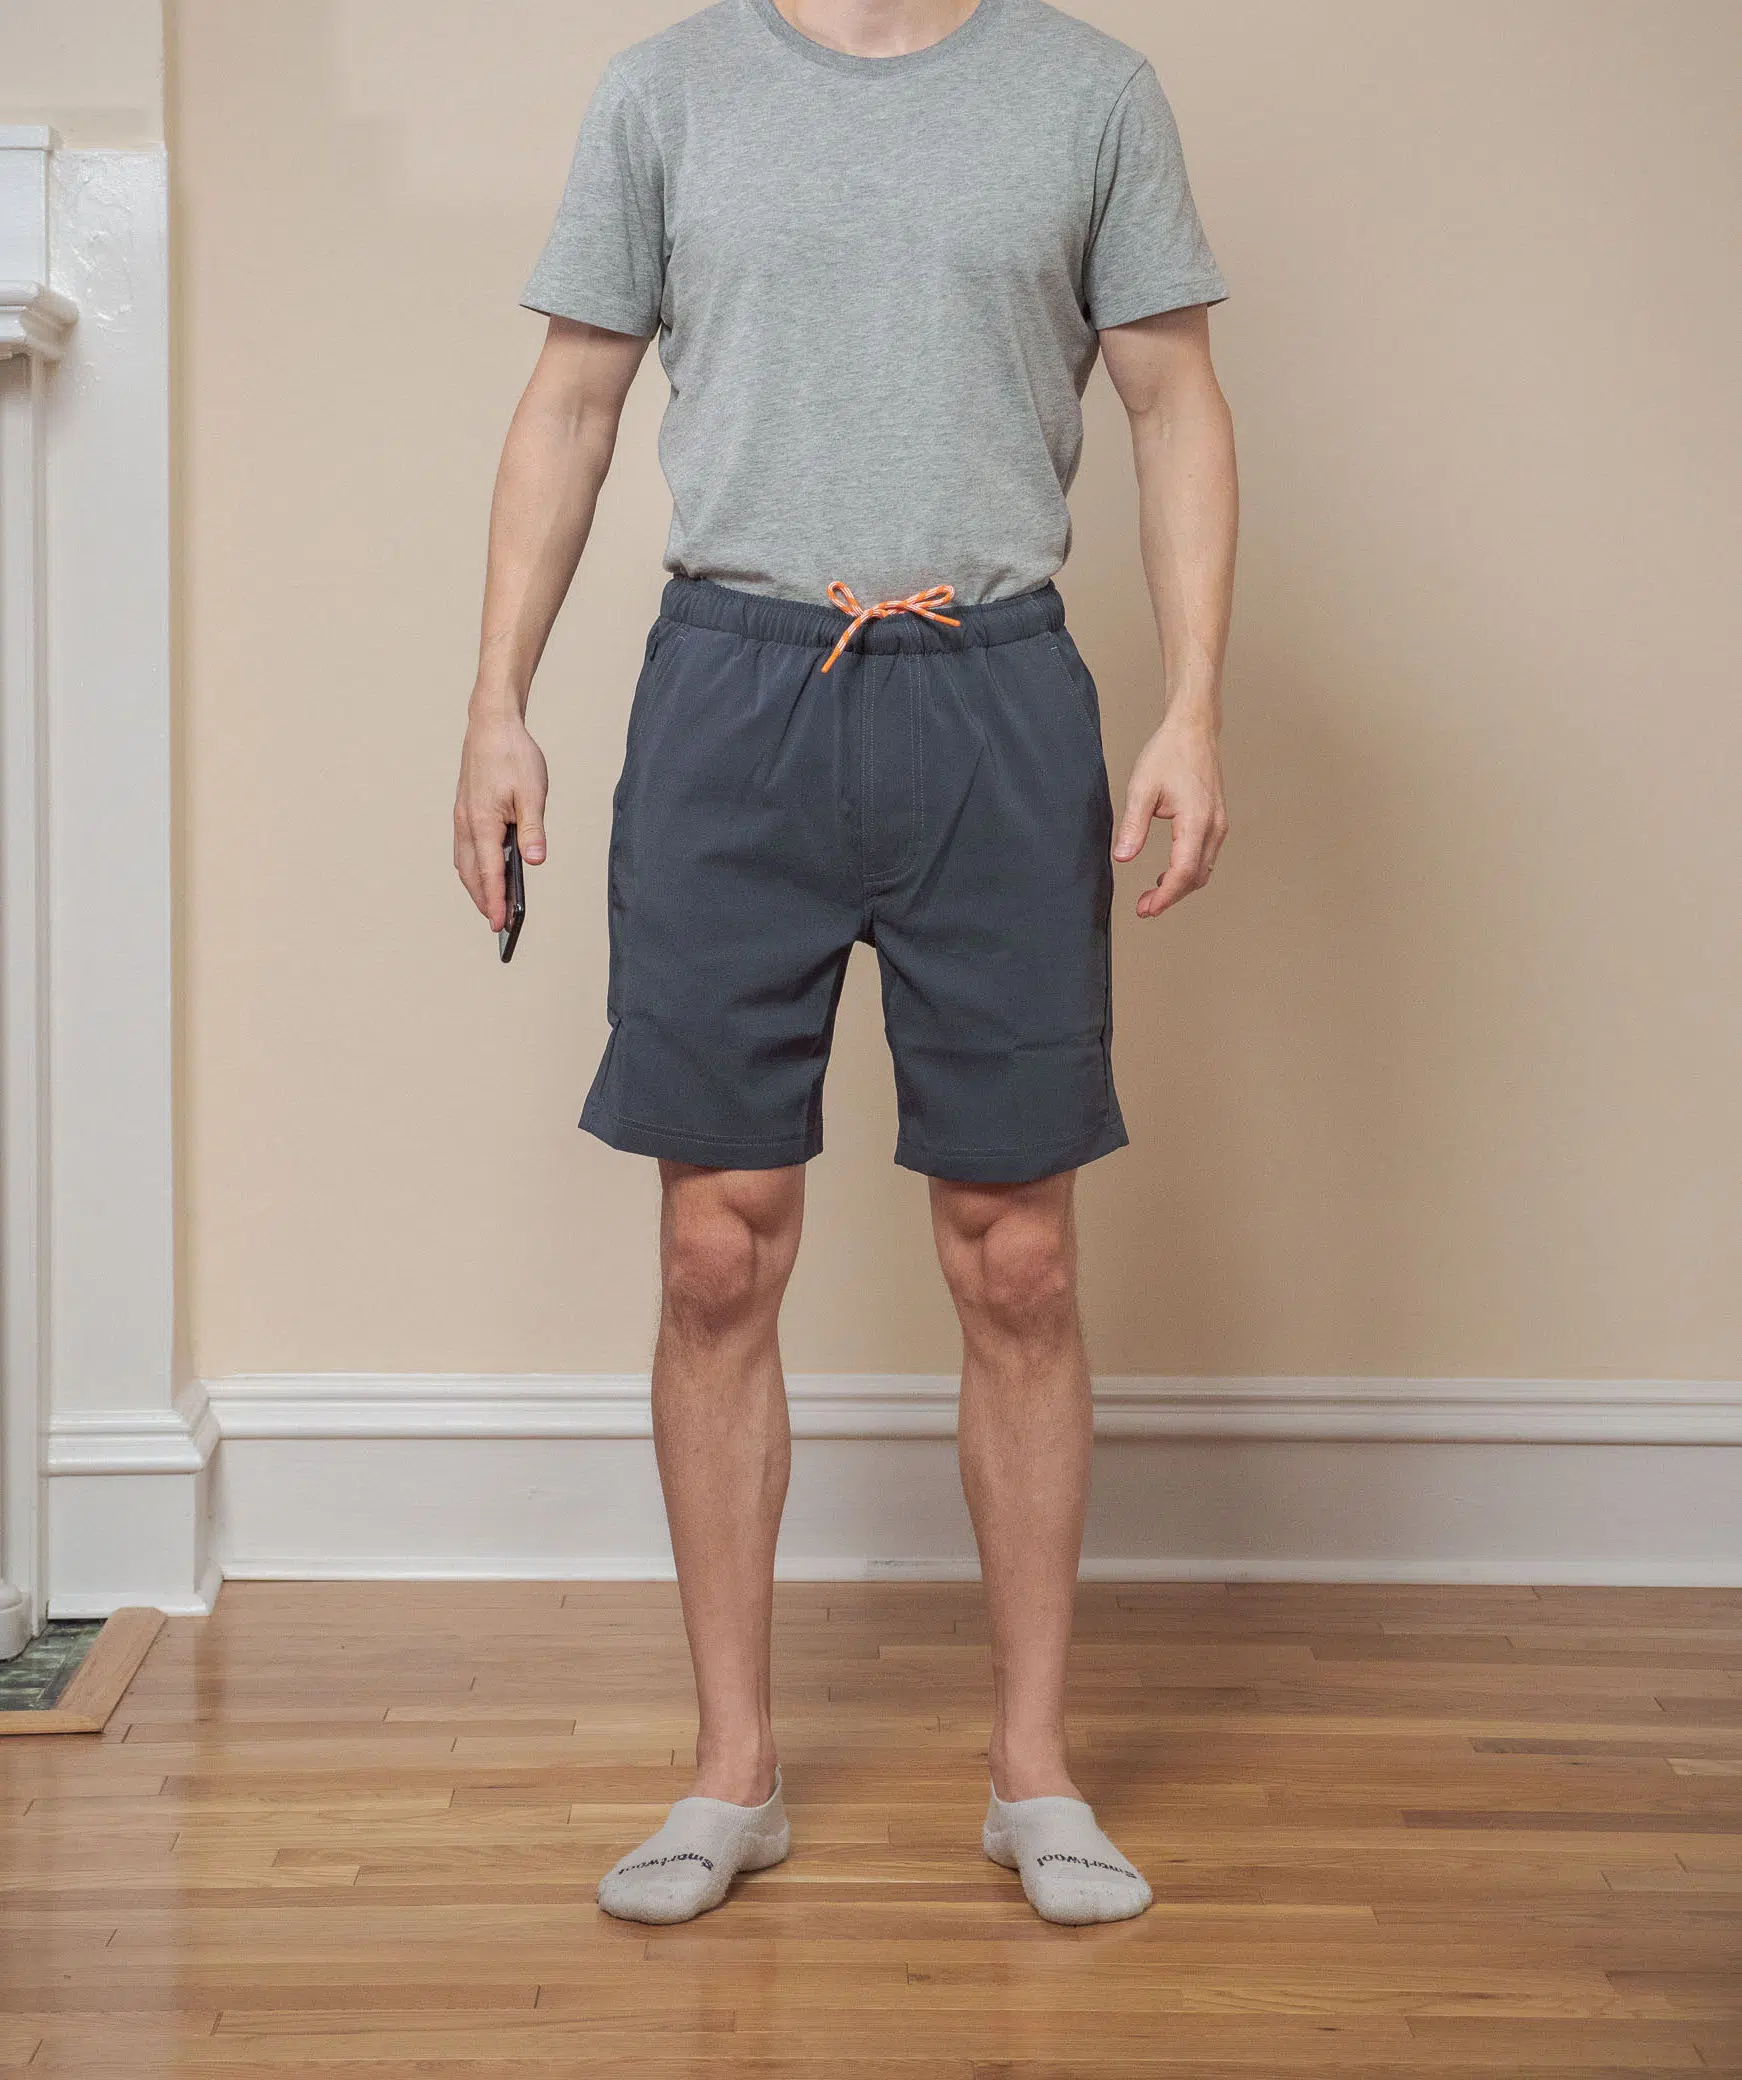 All Citizens Training Shorts rise